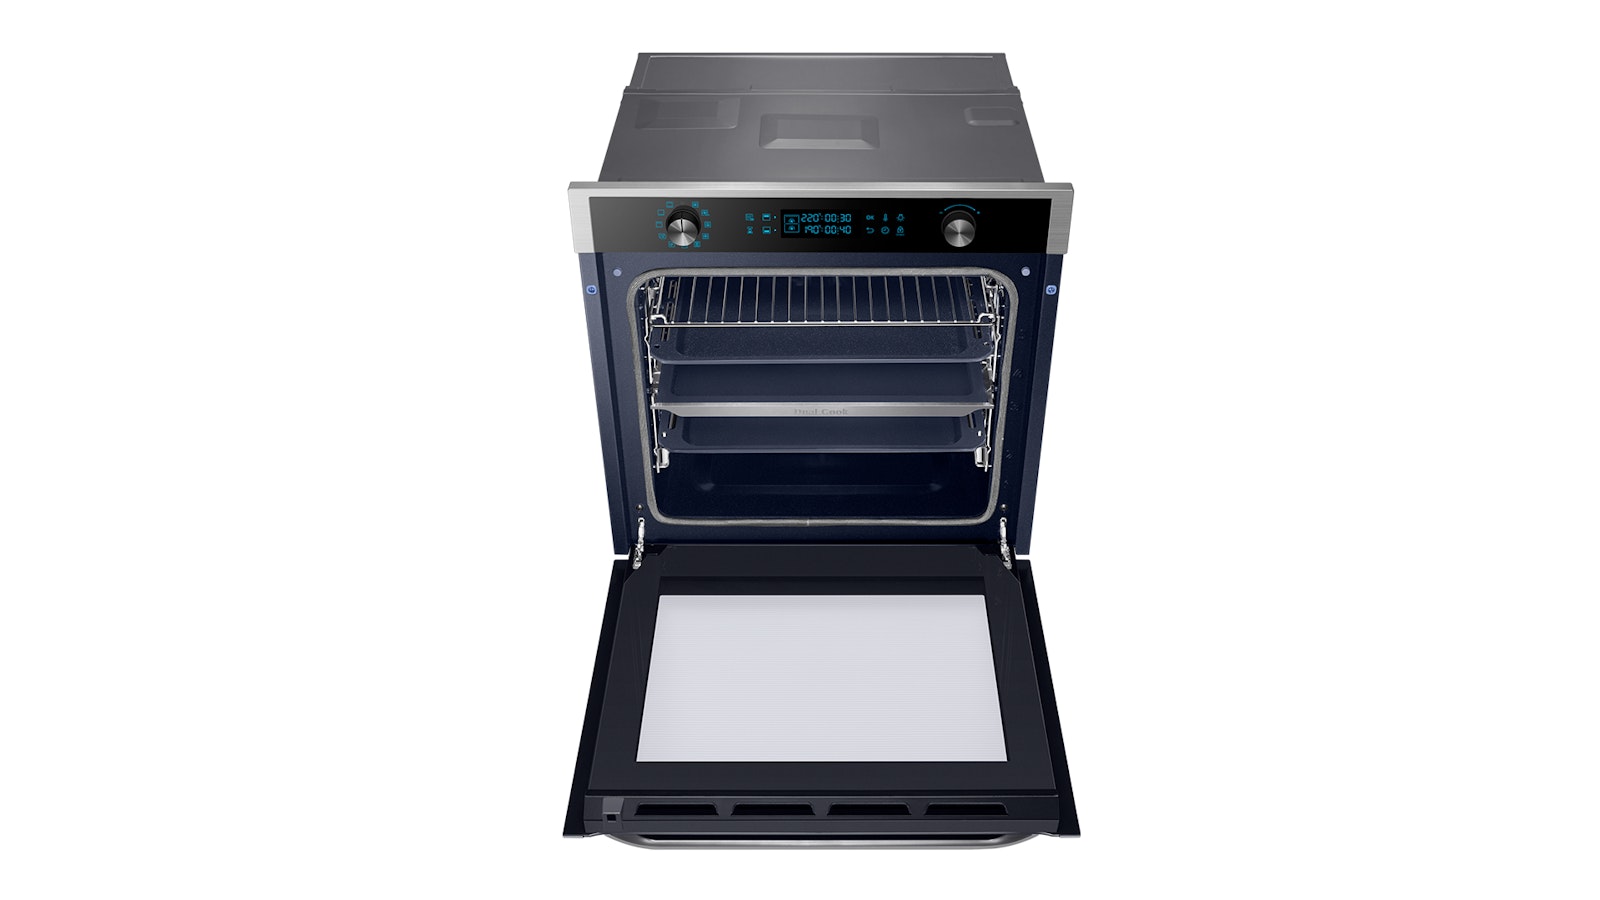 Samsung Dual Cook Pyrolytic Oven